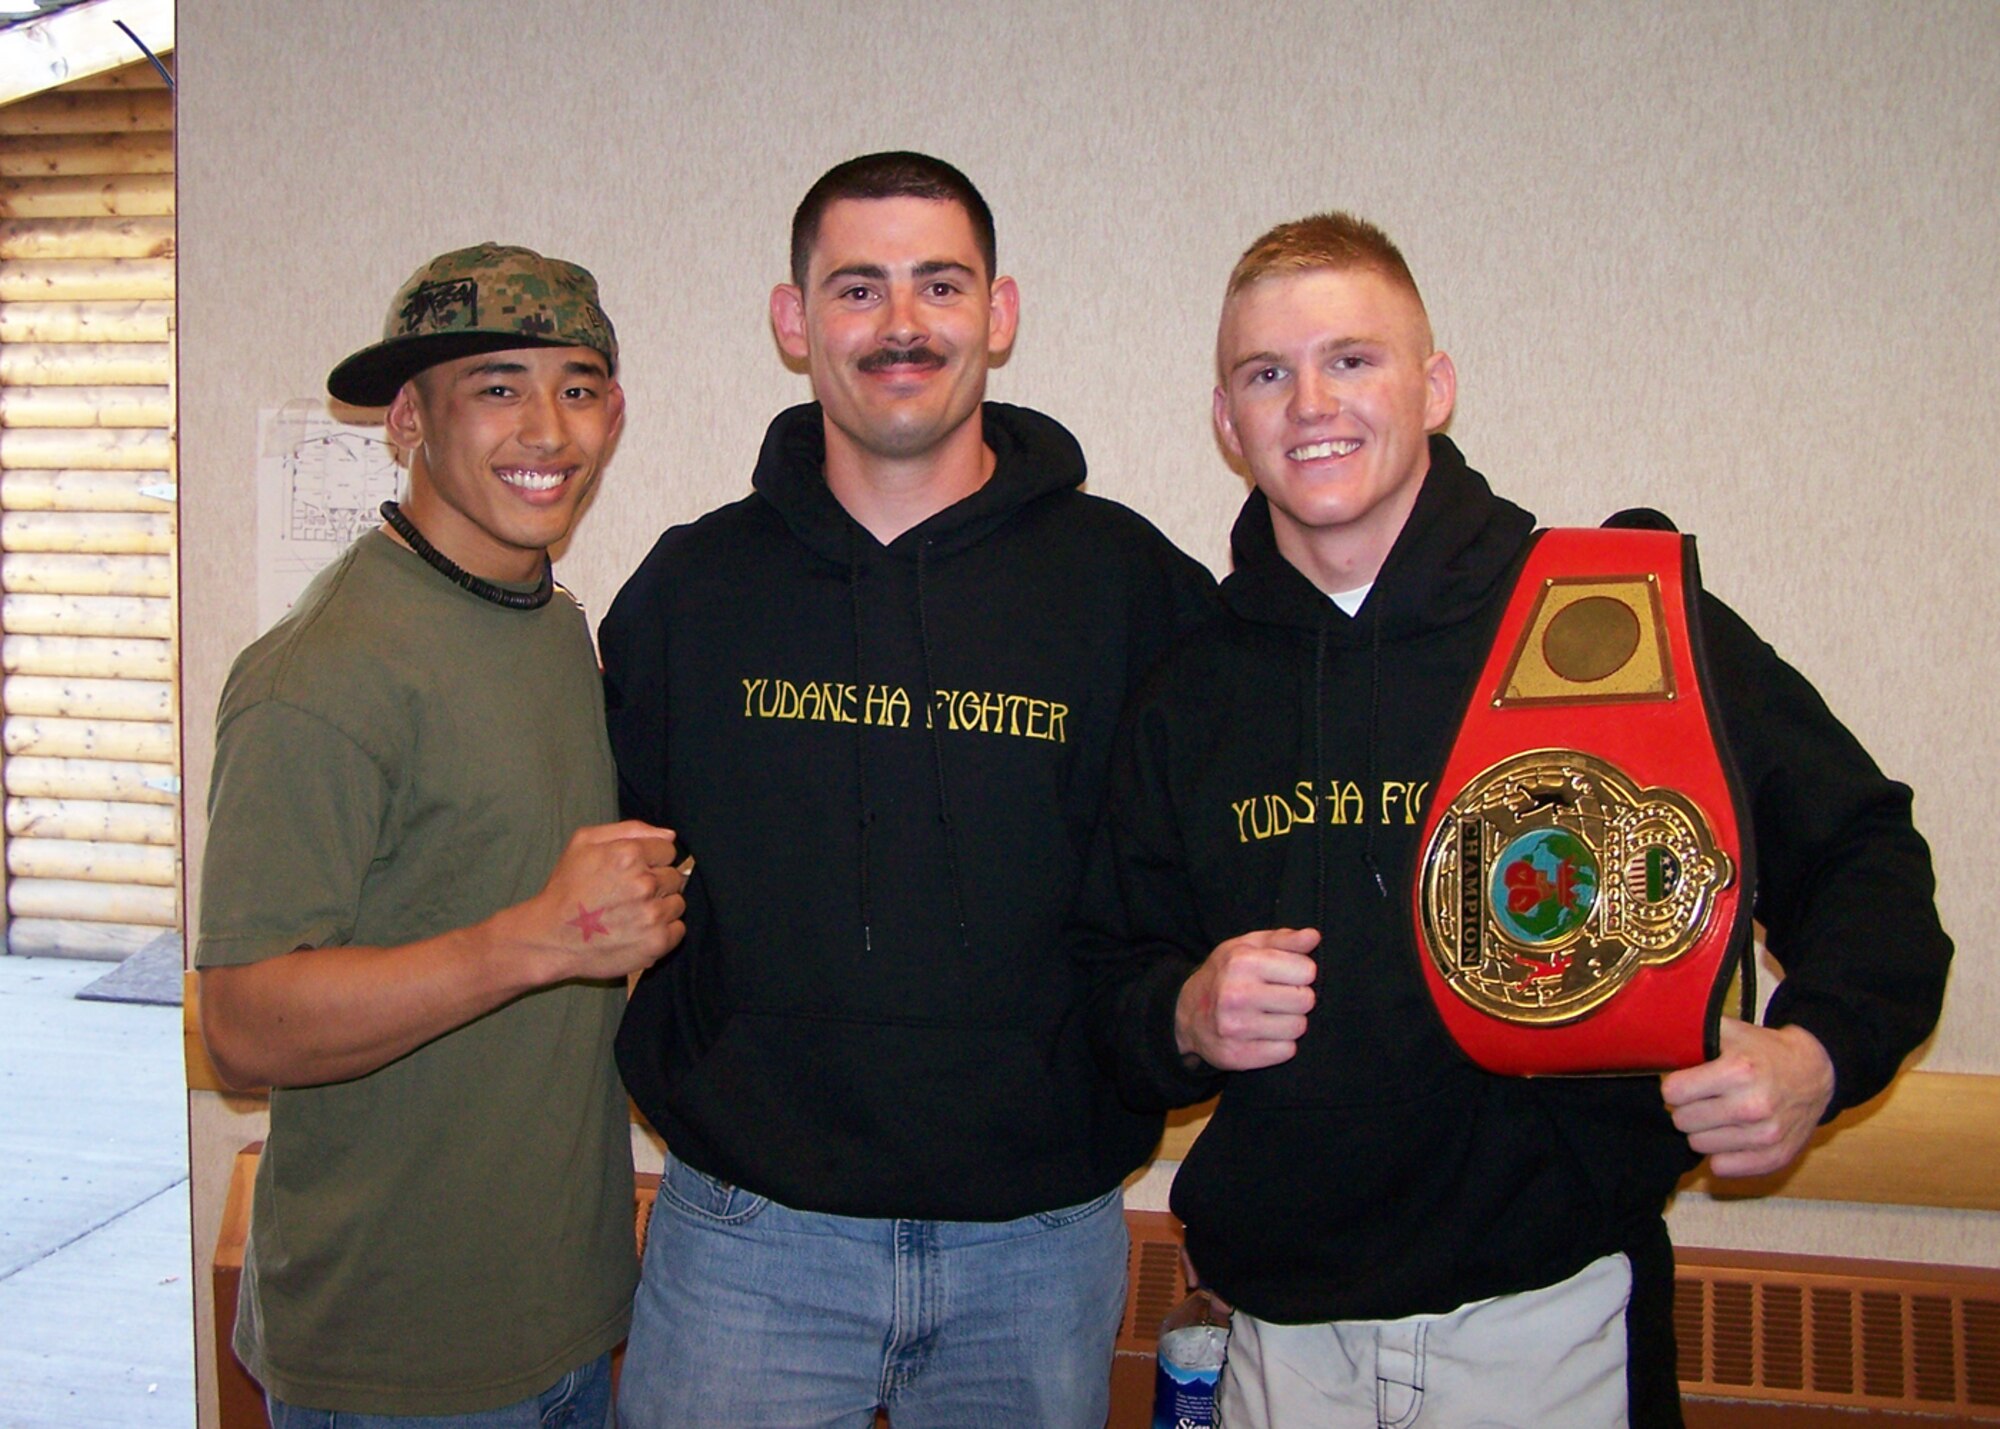 EIELSON AIR FORCE BASE, Alaska--Rico Respicio, Joseph Spedale and Brett Laswell pose for a shot after the June 22 Rumble on the River martial arts championship in Fairbanks. All are members of the Yudansha fighting system on base, Brett Laswell fought his way to a first place victory in the bantam weight class in two minutes and 45 seconds. Rico Respicio defeated his opponent in only 45 seconds. (courtesy photo)